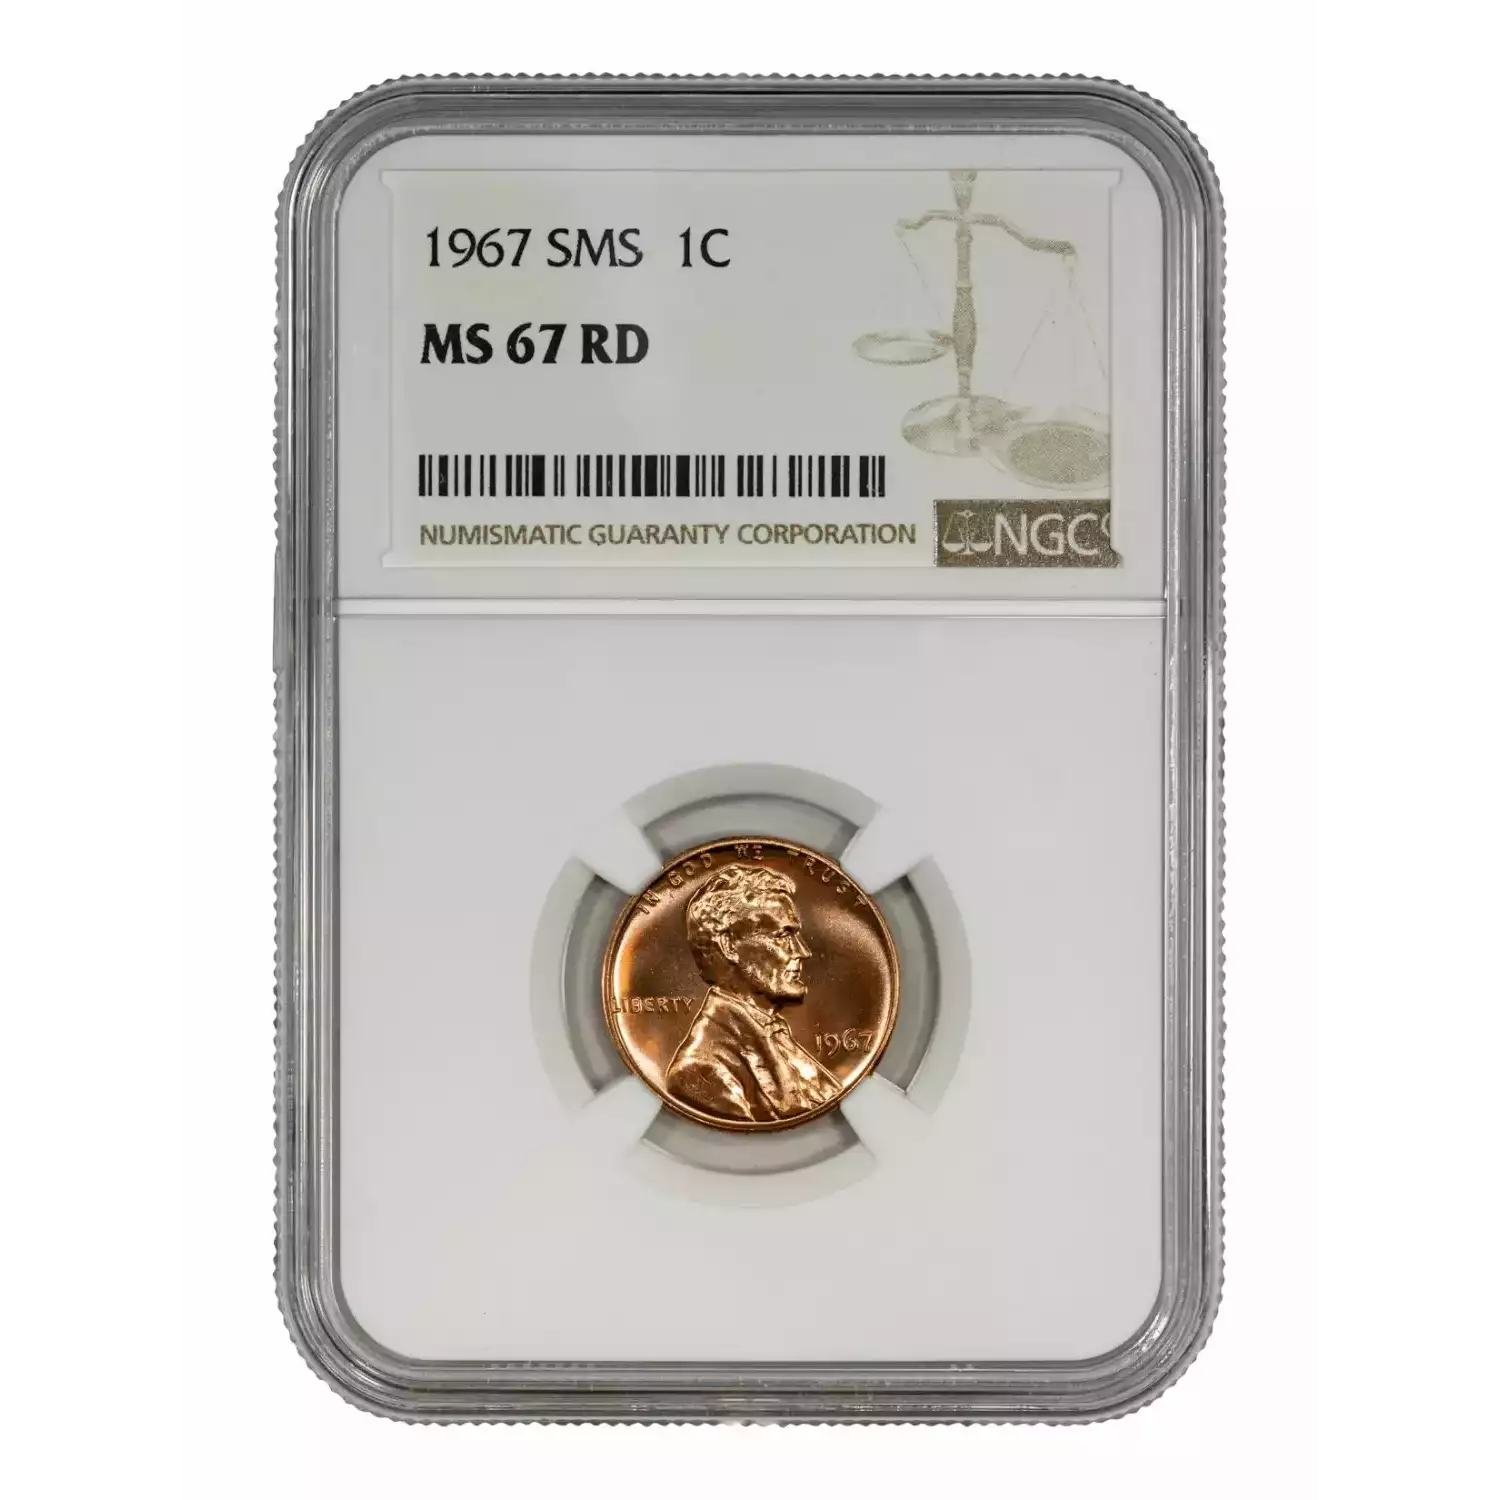 1967 SMS LINCOLN MEMORIAL CENT PENNY 1C NGC CERTIFIED MS 67 RD